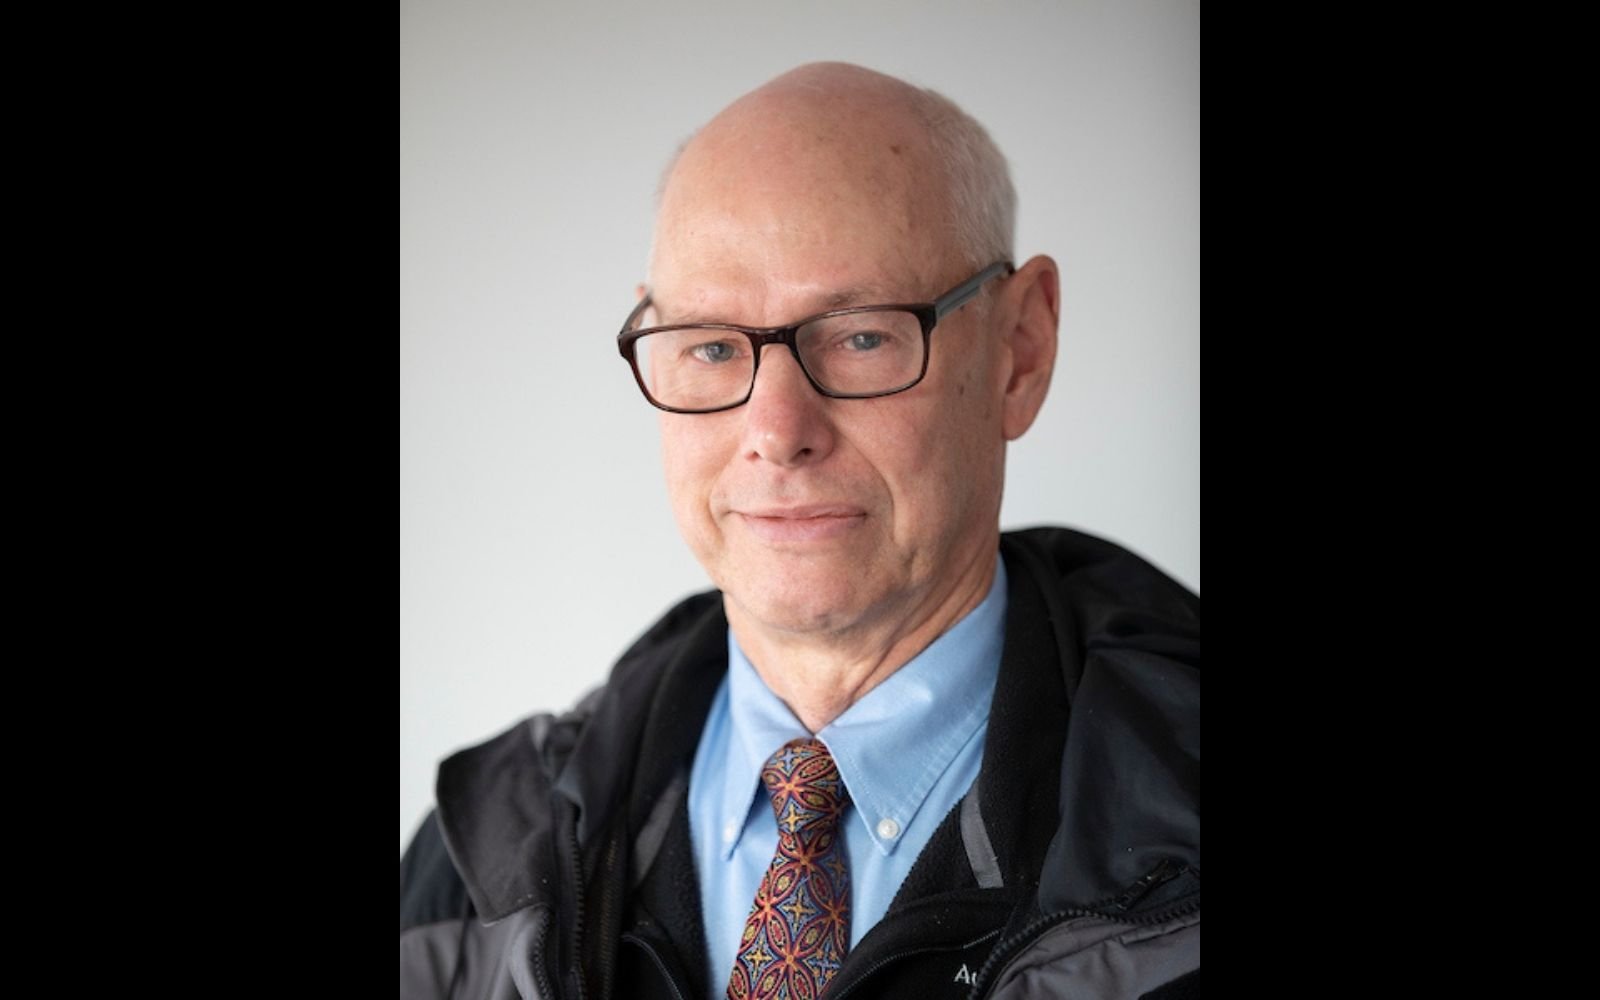 Head shot of bald man with glasses, a red tie, and a blue button down shirt